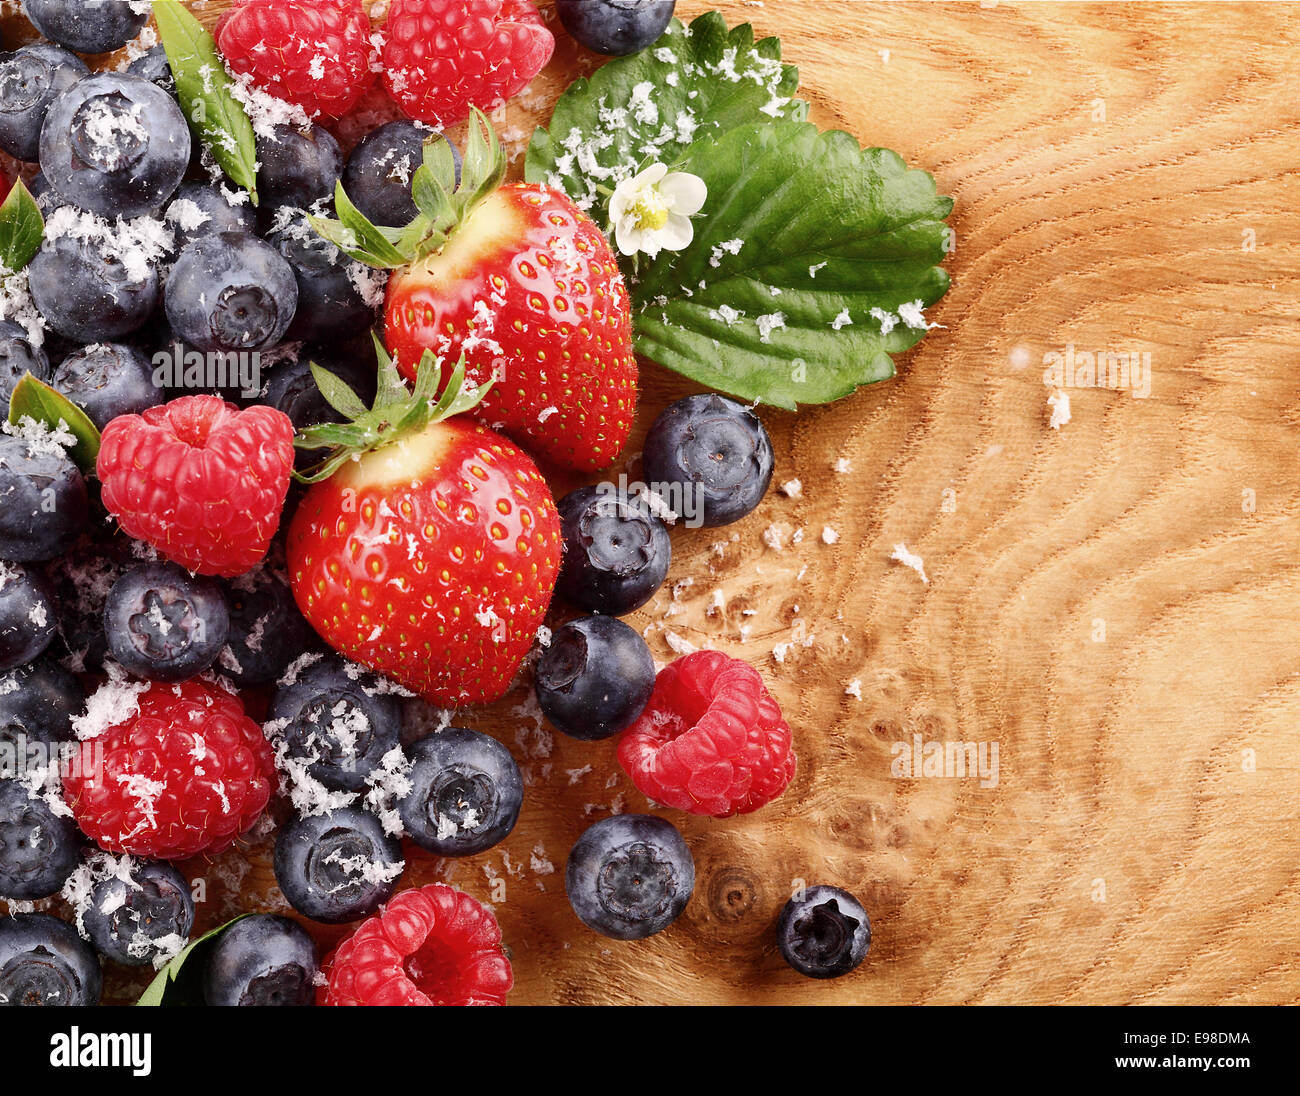 Top-view of an assortment of berries like blueberries, raspberries and strawberries over a wood table with copy-space Stock Photo